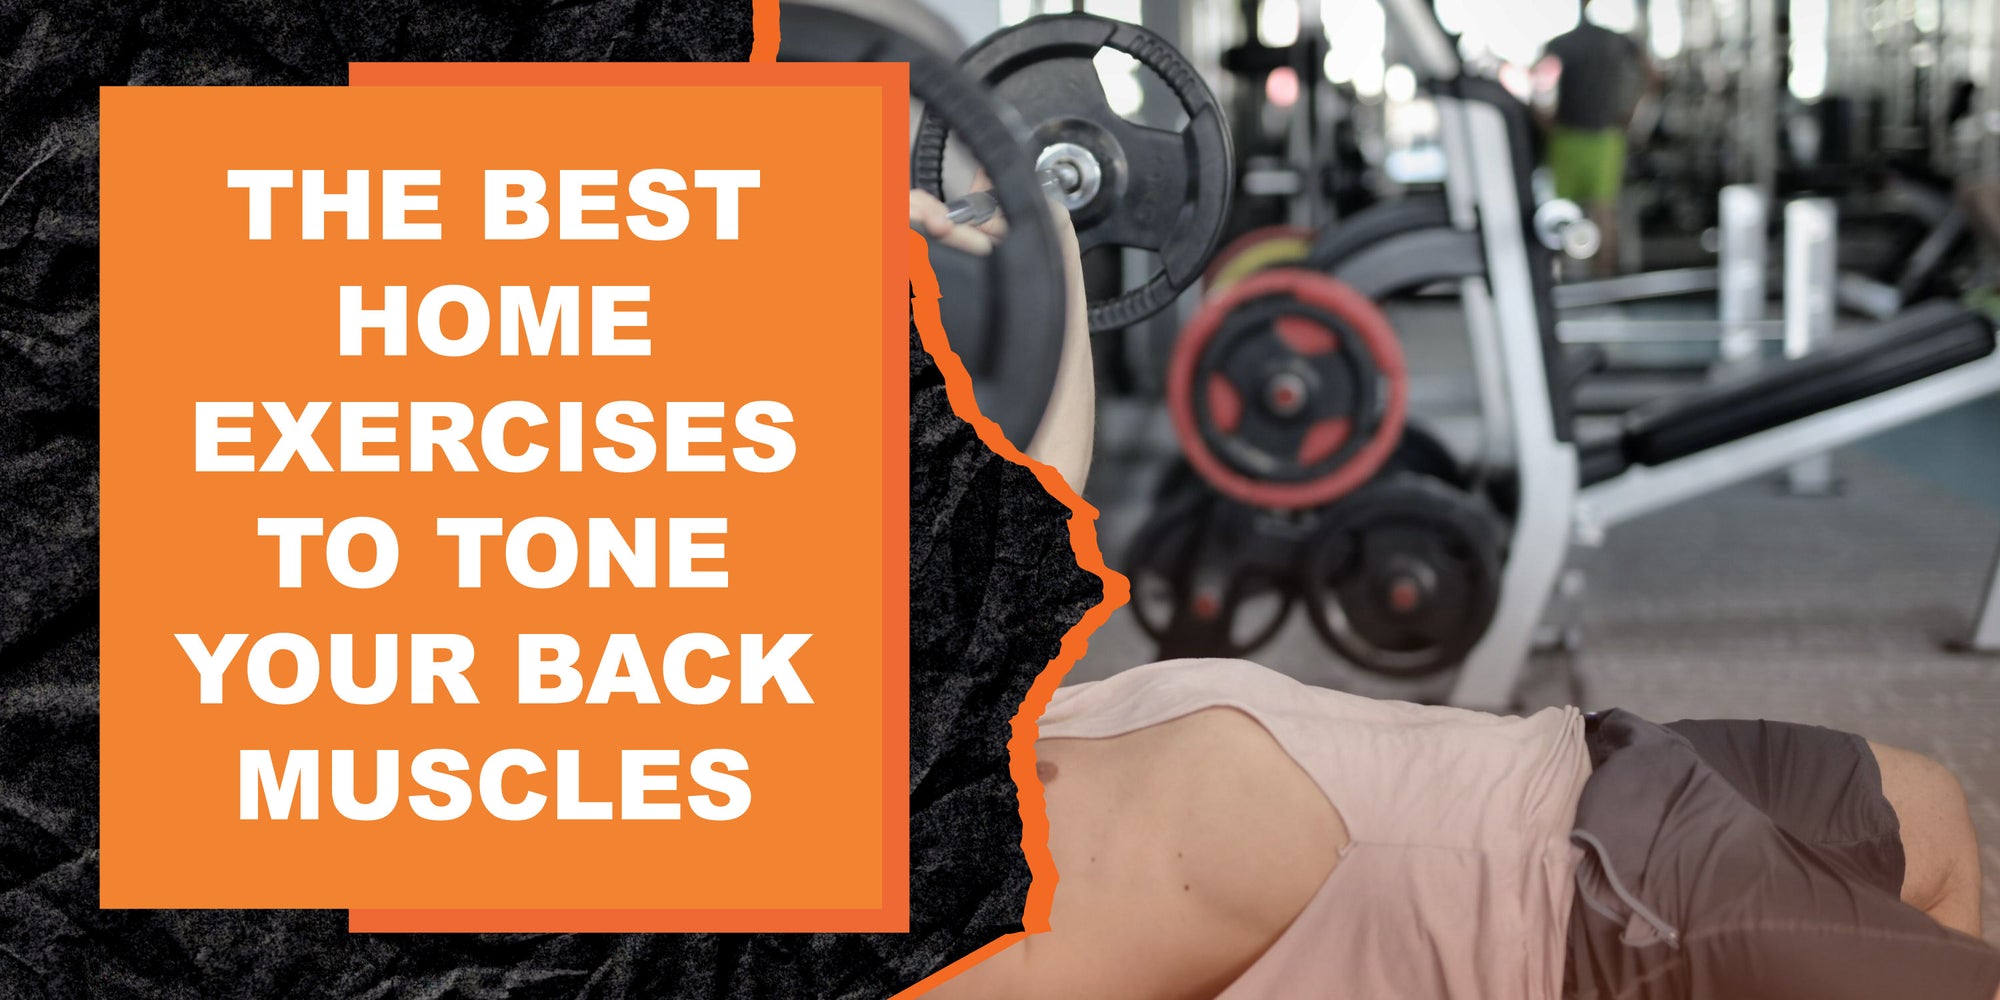 The Best Home Exercises to Tone Your Back Muscles